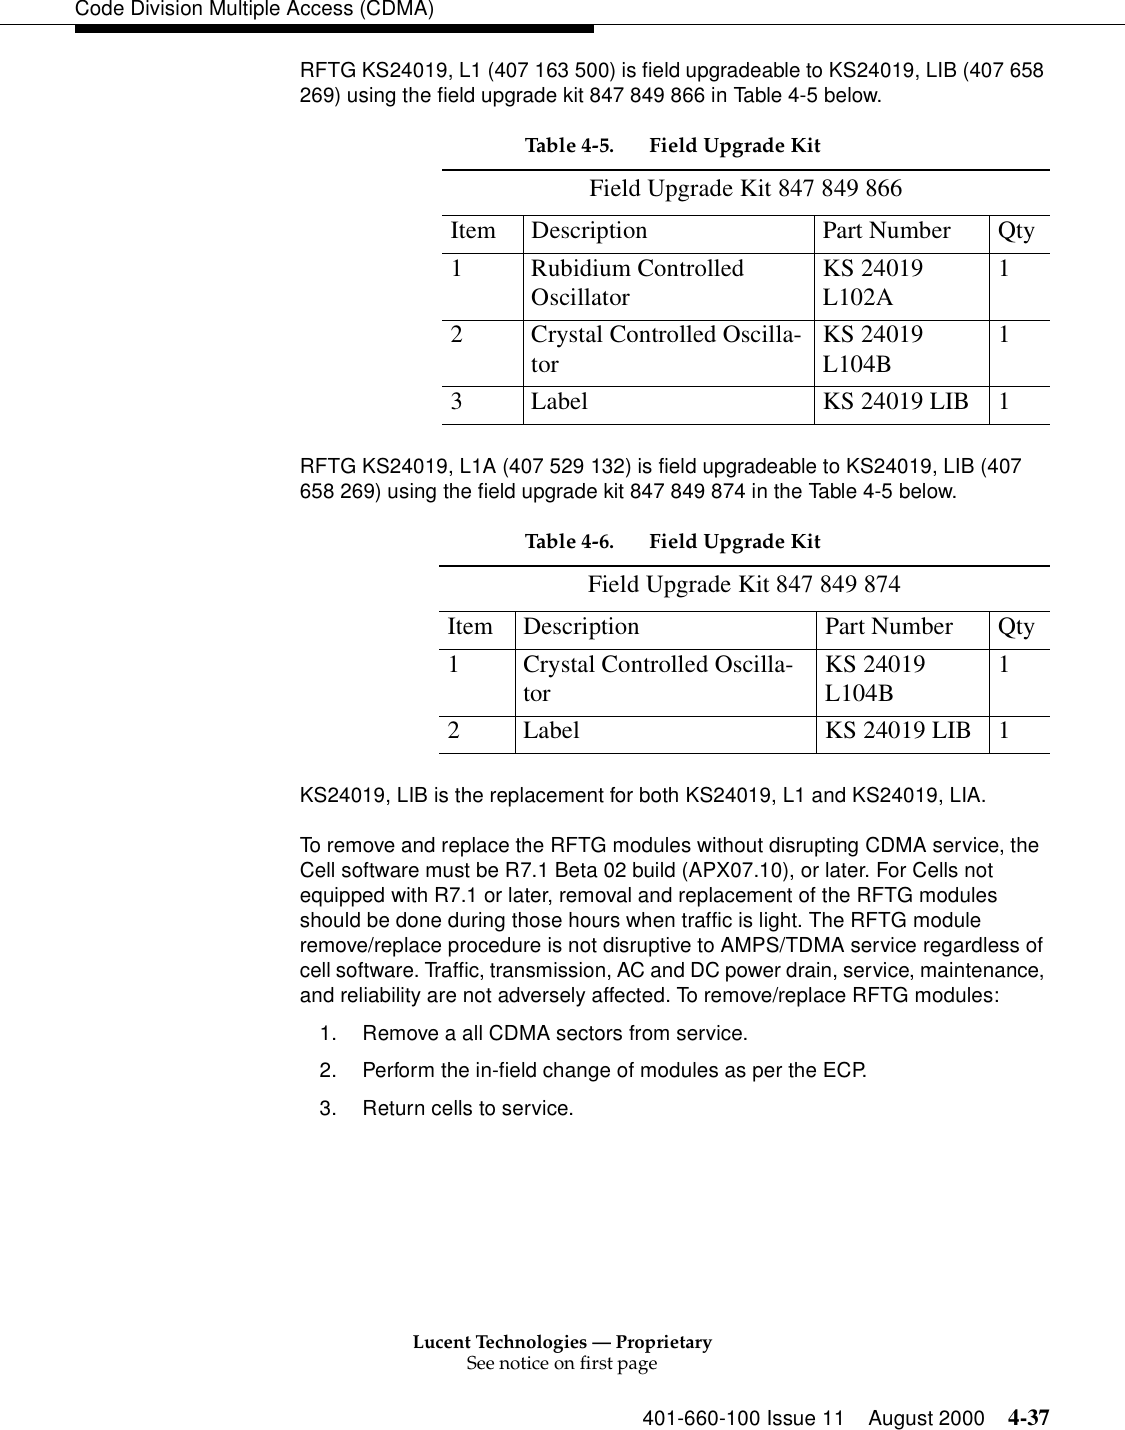 Lucent Technologies — ProprietarySee notice on first page401-660-100 Issue 11 August 2000 4-37Code Division Multiple Access (CDMA)RFTG KS24019, L1 (407 163 500) is field upgradeable to KS24019, LIB (407 658 269) using the field upgrade kit 847 849 866 in Table 4-5 below. RFTG KS24019, L1A (407 529 132) is field upgradeable to KS24019, LIB (407 658 269) using the field upgrade kit 847 849 874 in the Table 4-5 below.KS24019, LIB is the replacement for both KS24019, L1 and KS24019, LIA.To remove and replace the RFTG modules without disrupting CDMA service, the Cell software must be R7.1 Beta 02 build (APX07.10), or later. For Cells not equipped with R7.1 or later, removal and replacement of the RFTG modules should be done during those hours when traffic is light. The RFTG module remove/replace procedure is not disruptive to AMPS/TDMA service regardless of cell software. Traffic, transmission, AC and DC power drain, service, maintenance, and reliability are not adversely affected. To remove/replace RFTG modules:1. Remove a all CDMA sectors from service.2. Perform the in-field change of modules as per the ECP.3. Return cells to service.Table 4-5. Field Upgrade KitField Upgrade Kit 847 849 866Item Description Part Number Qty1 Rubidium Controlled Oscillator KS 24019 L102A 12 Crystal Controlled Oscilla-tor KS 24019 L104B 13 Label KS 24019 LIB 1Table 4-6. Field Upgrade KitField Upgrade Kit 847 849 874Item Description Part Number Qty1 Crystal Controlled Oscilla-tor KS 24019 L104B 12 Label KS 24019 LIB 1